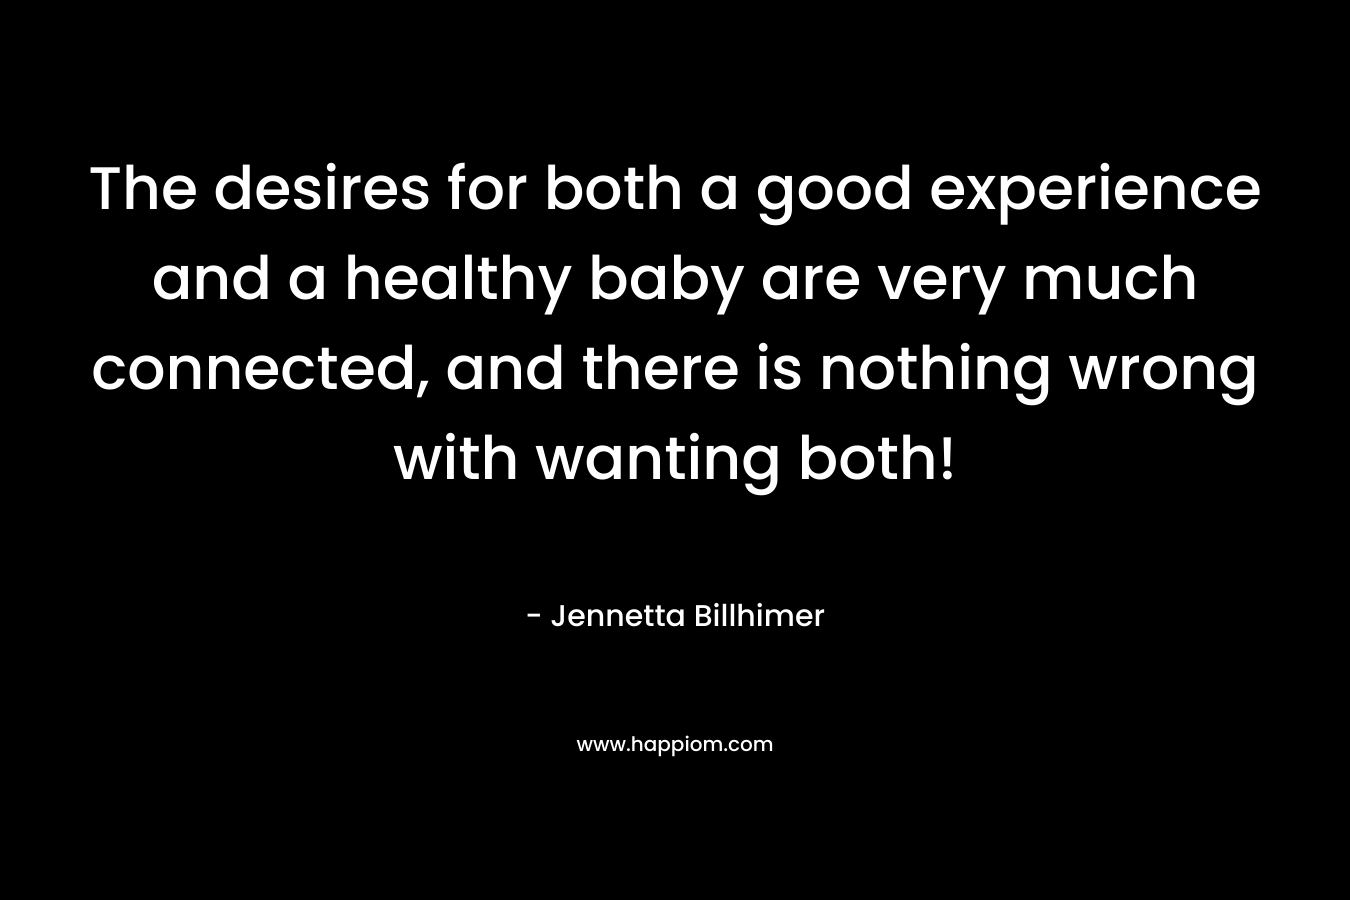 The desires for both a good experience and a healthy baby are very much connected, and there is nothing wrong with wanting both!